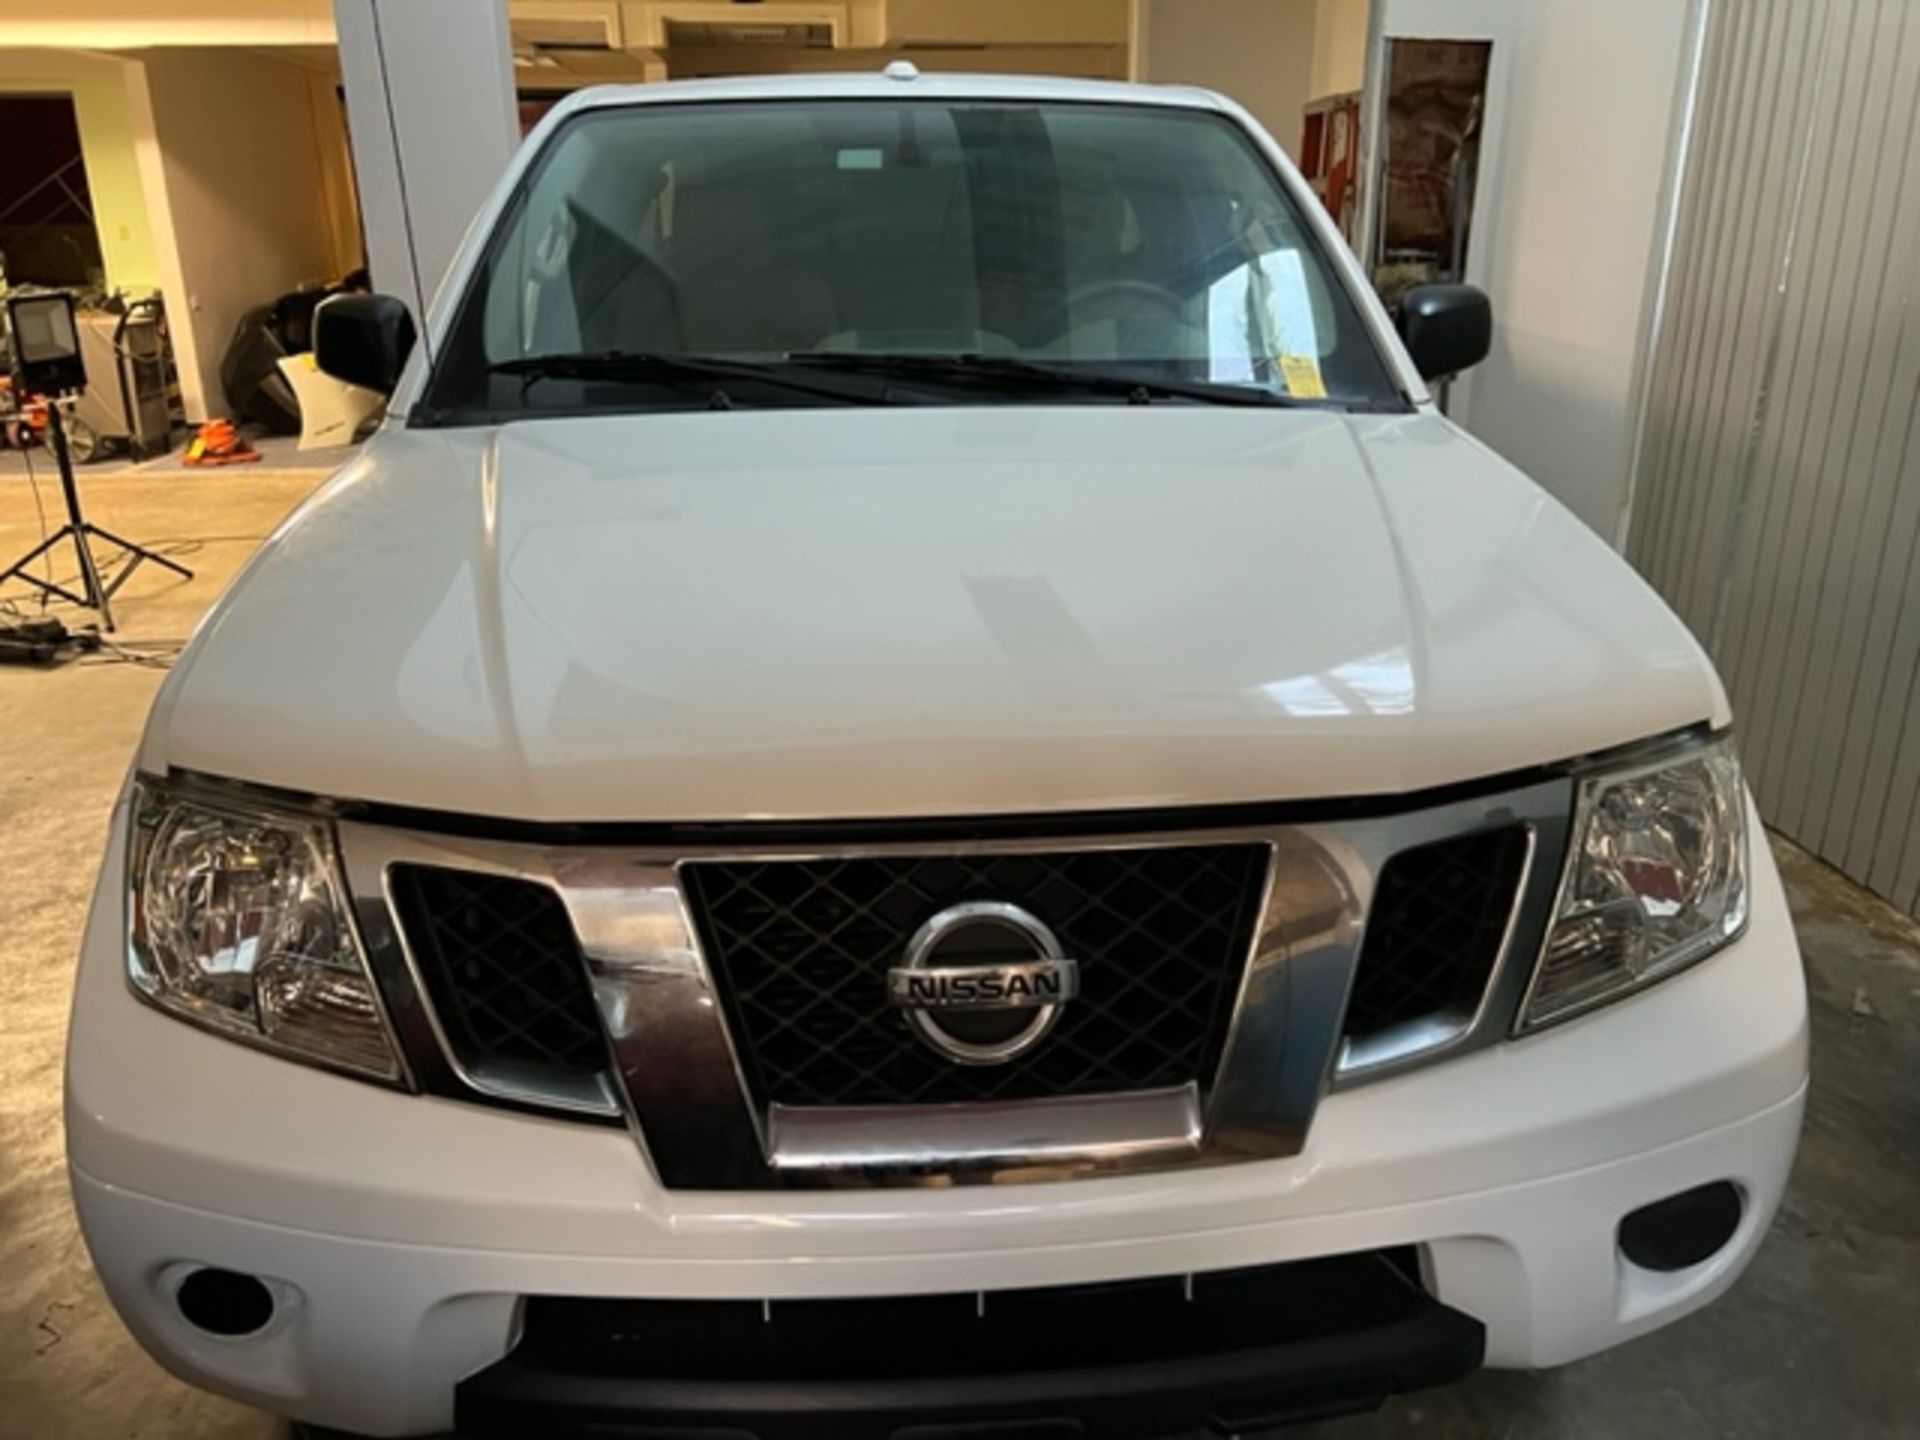 2015 NISSAN FRONTIER PICKUP TRUCK - VIN #1N6AD0CU5FN72560 - WHITE - AUTOMATIC TRANSMISSION - AIR CON